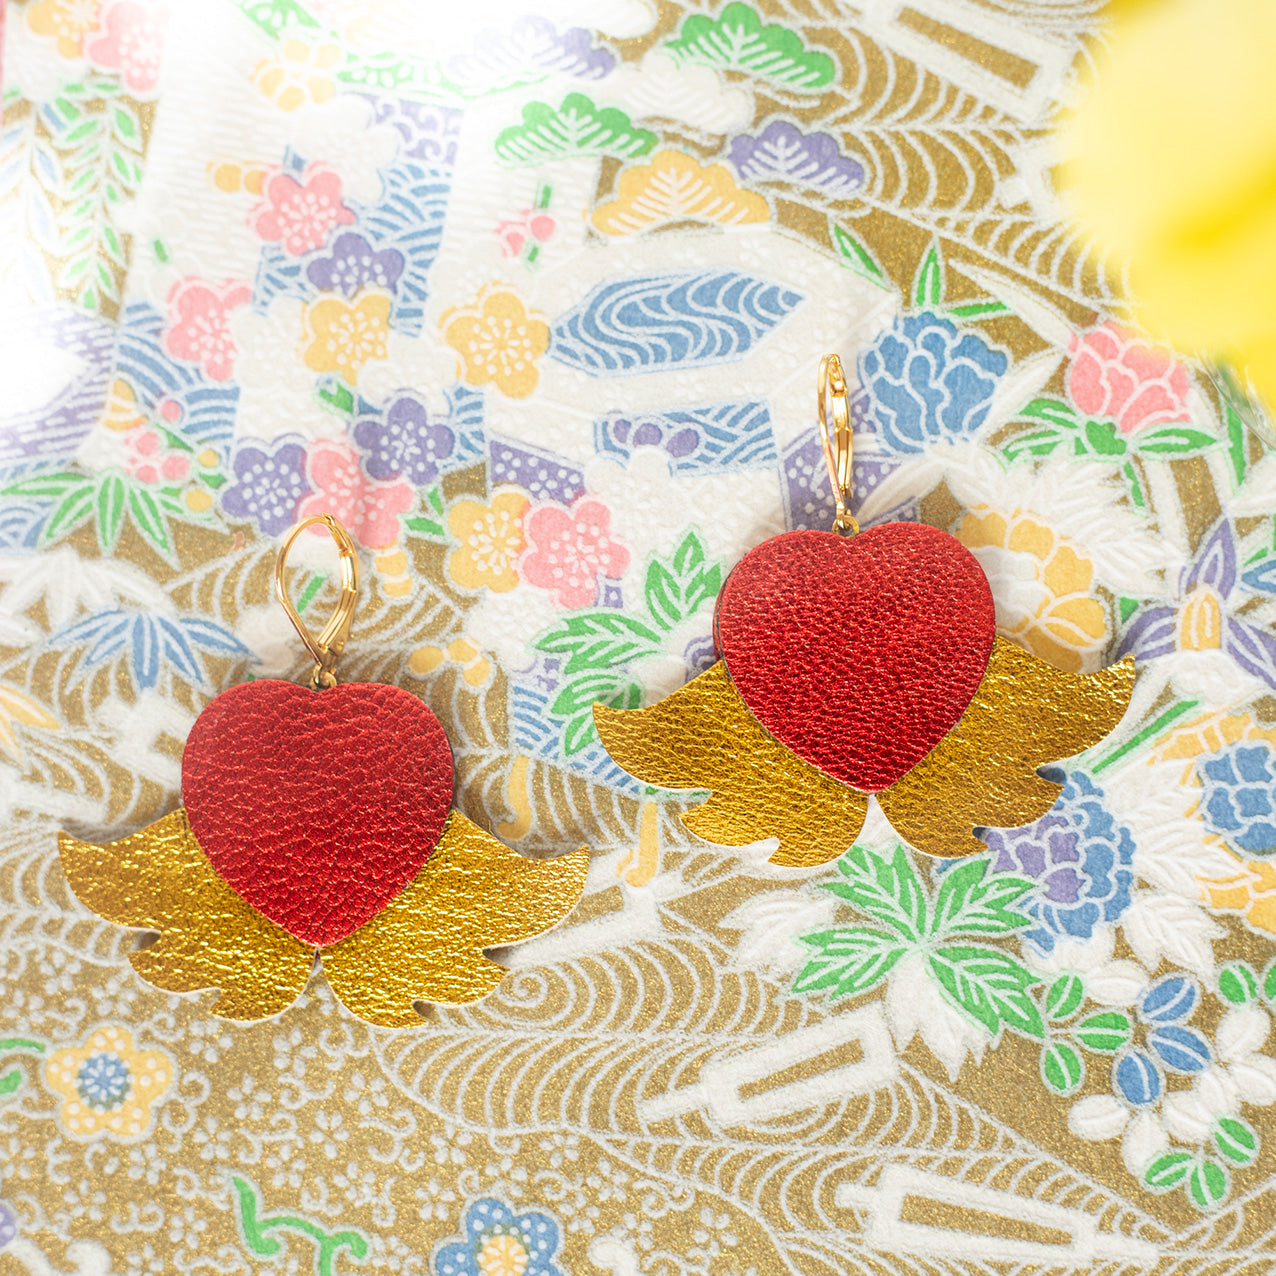 Winged hearts earrings in gold and metallic red leather